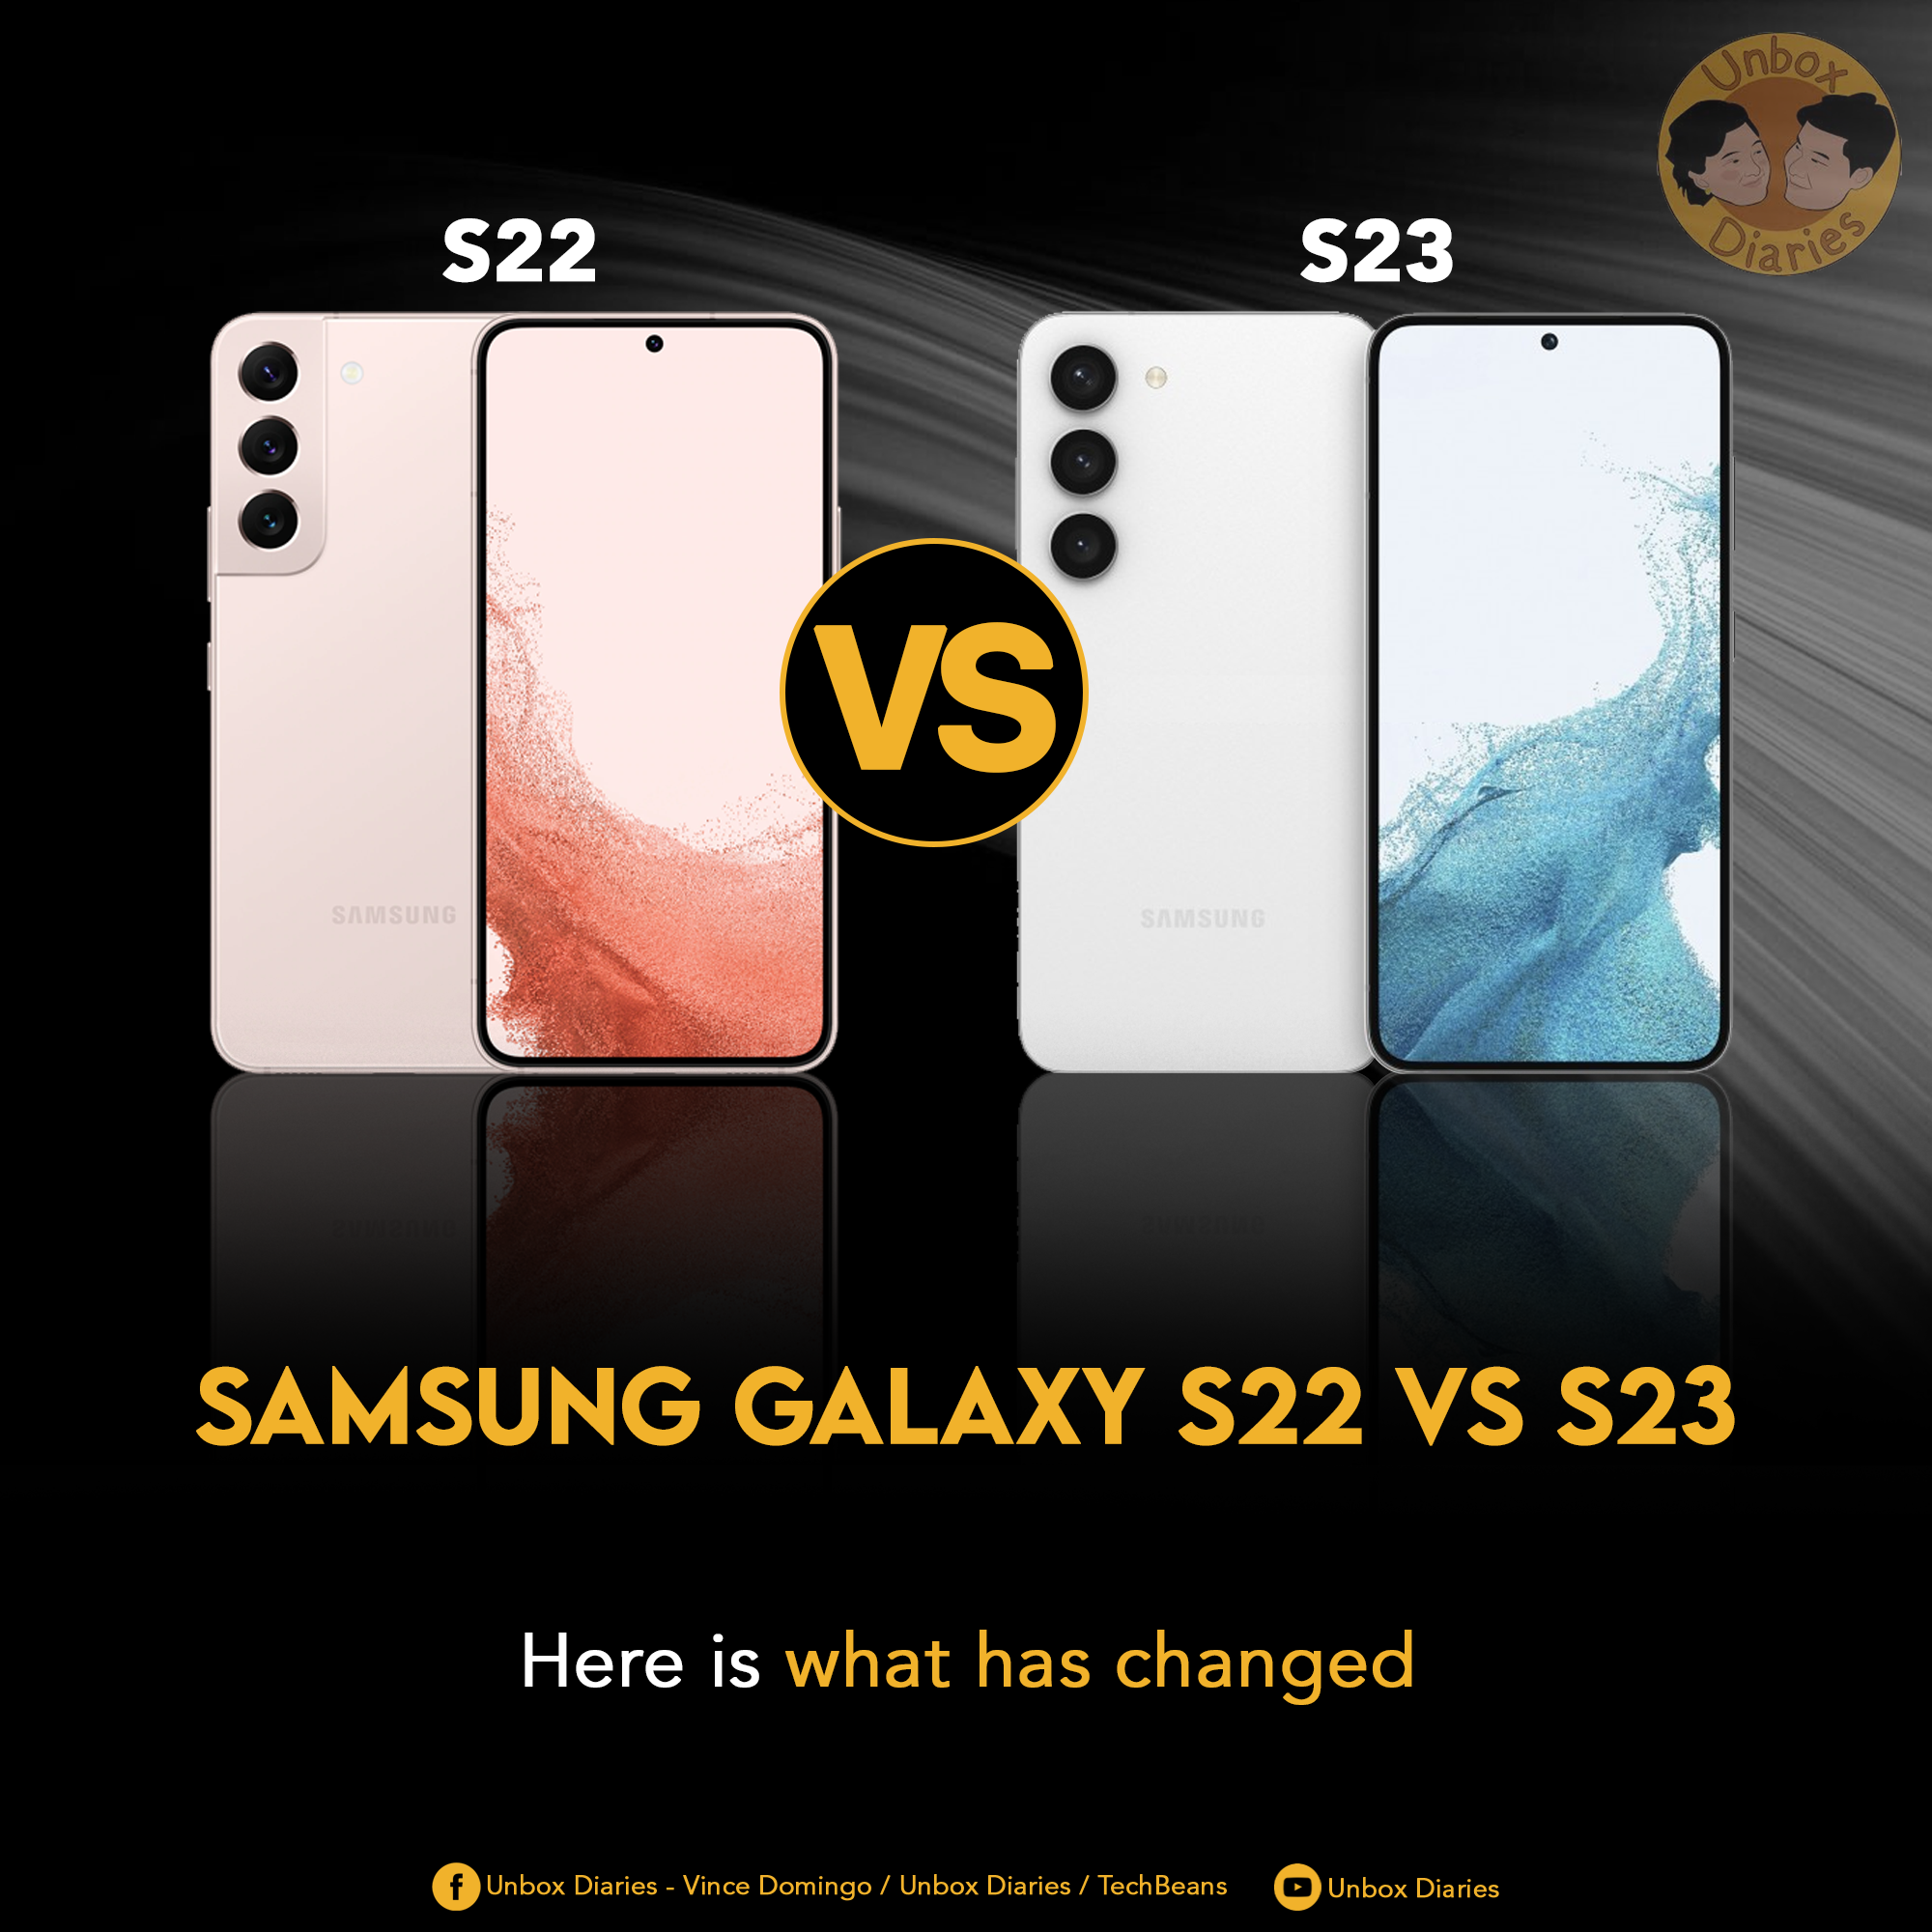 Samsung Galaxy S23 vs S22: Specs, price, and more.